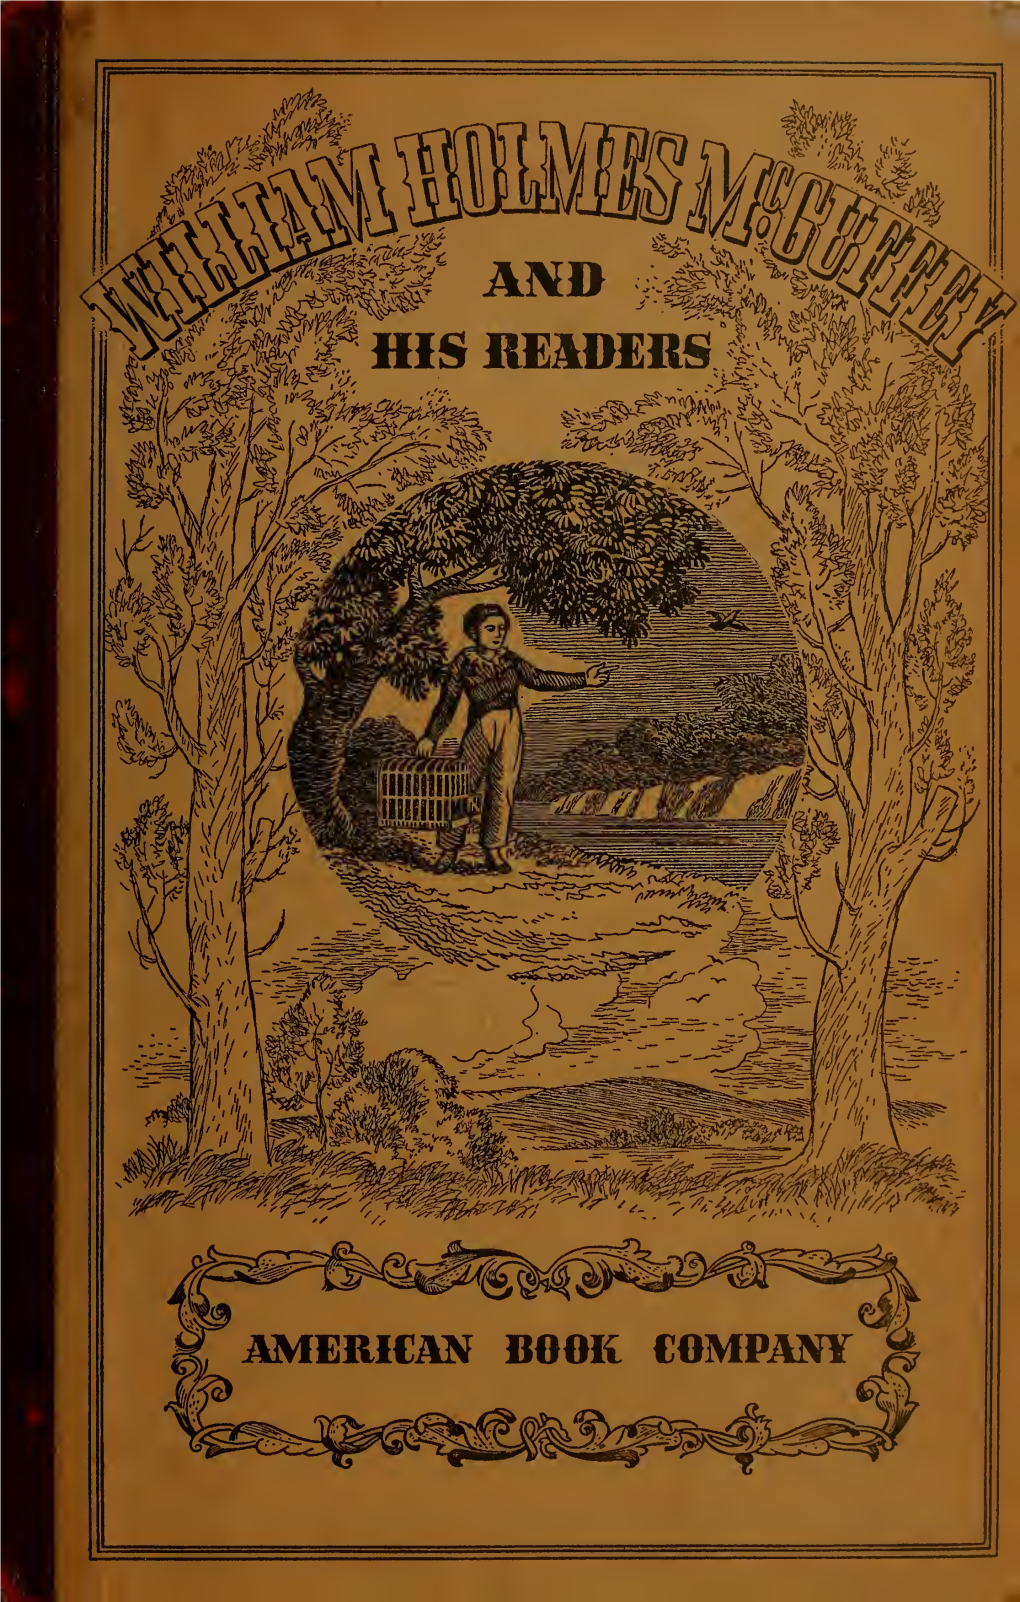 WILLIAM HOLMES Mcguffey and HIS READERS Five Years to Pay the Entire Obligation